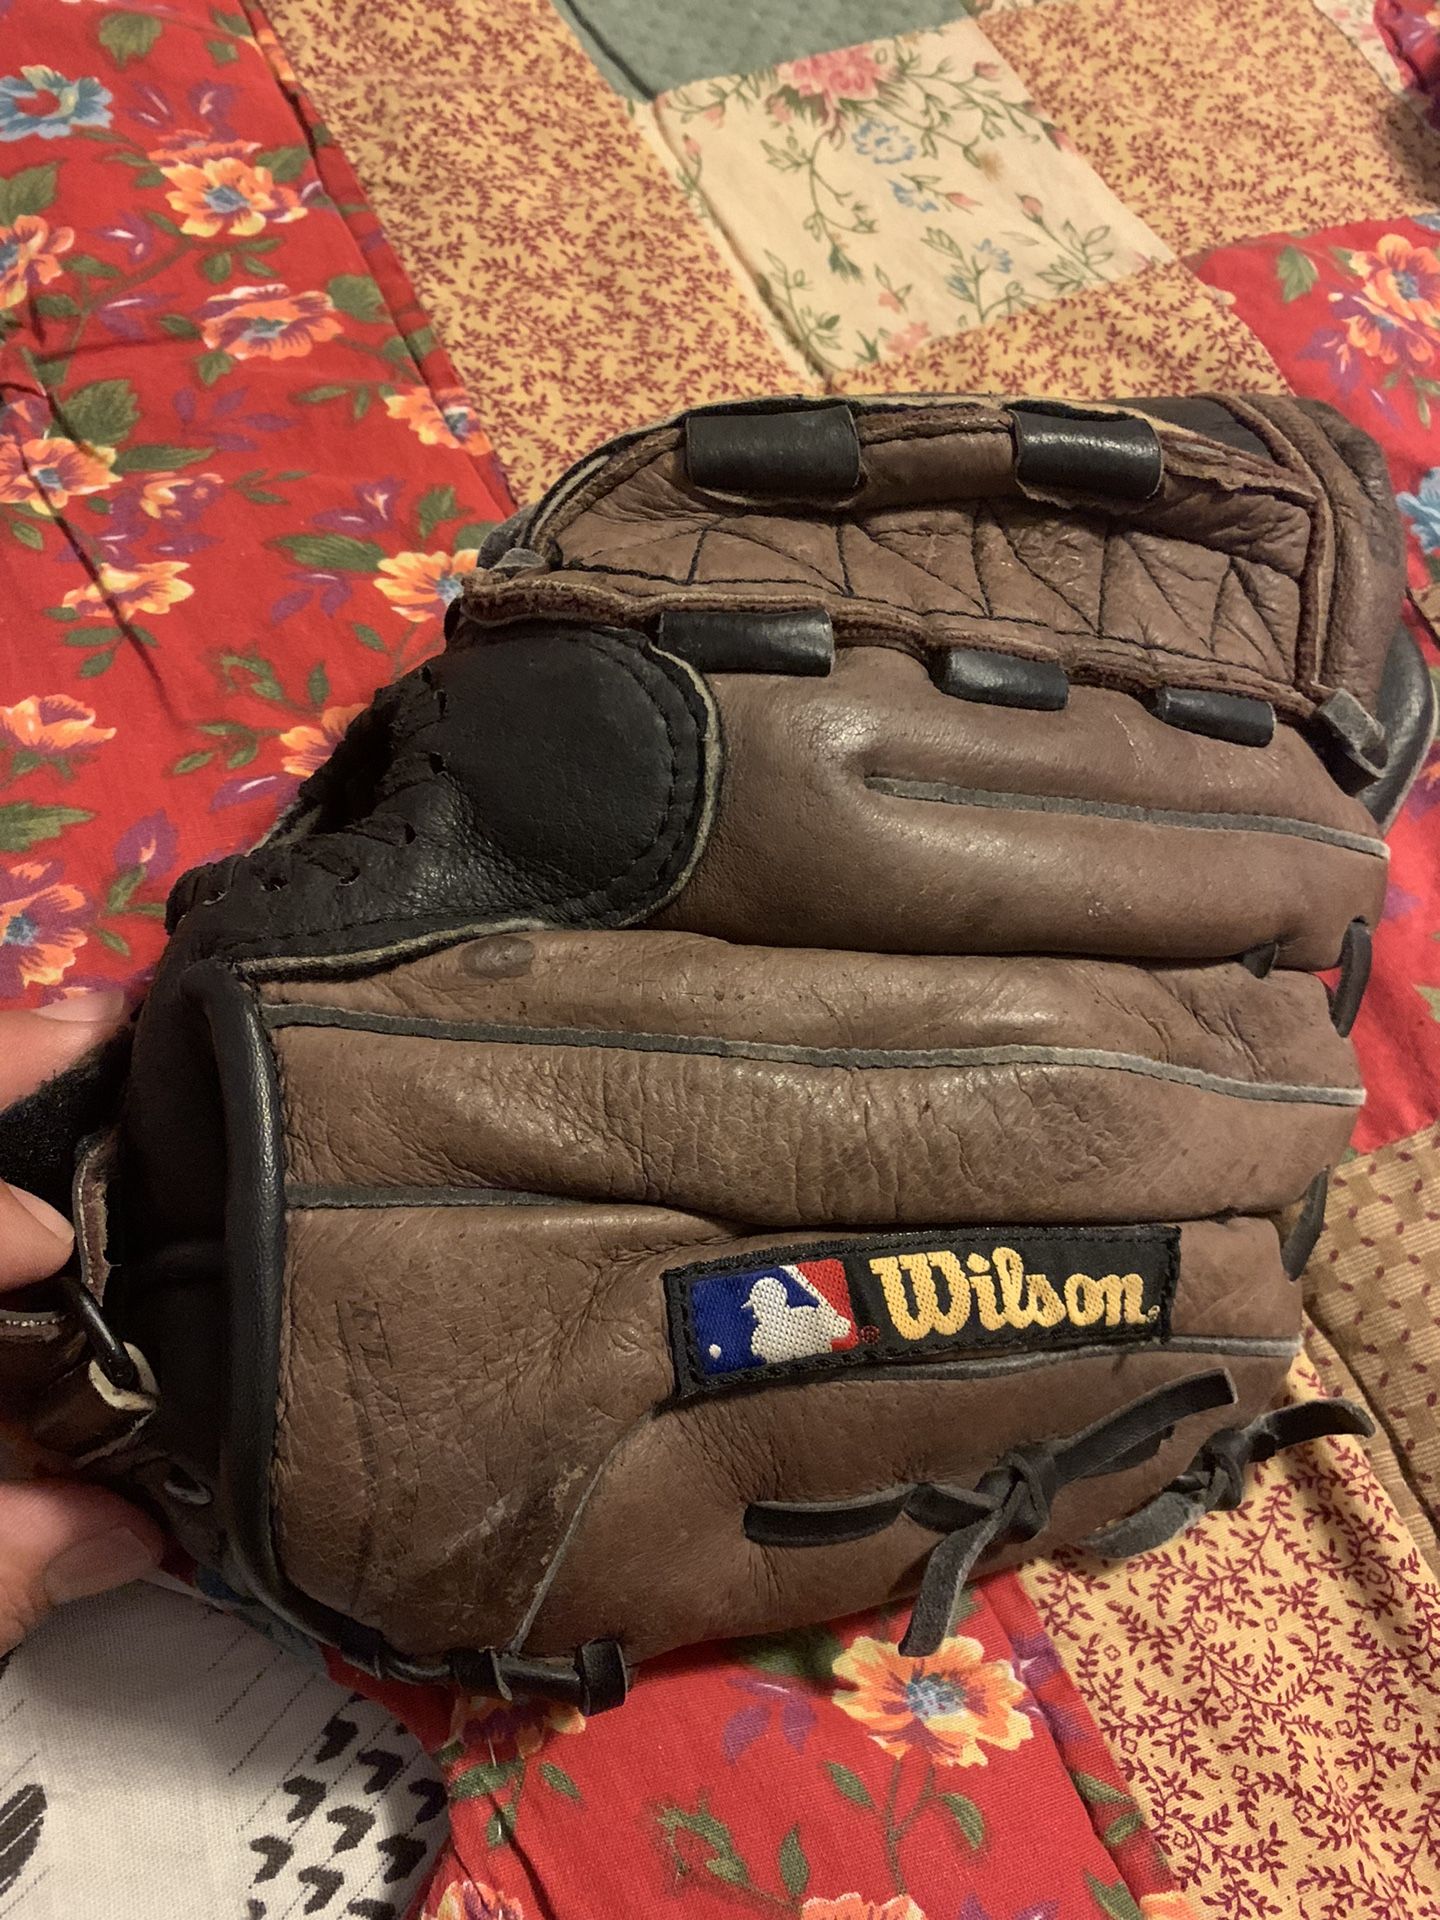 Wilson 10 1/2” Easy Catch Baseball Glove For Lefties . Glove Goes On Right Hand . $4